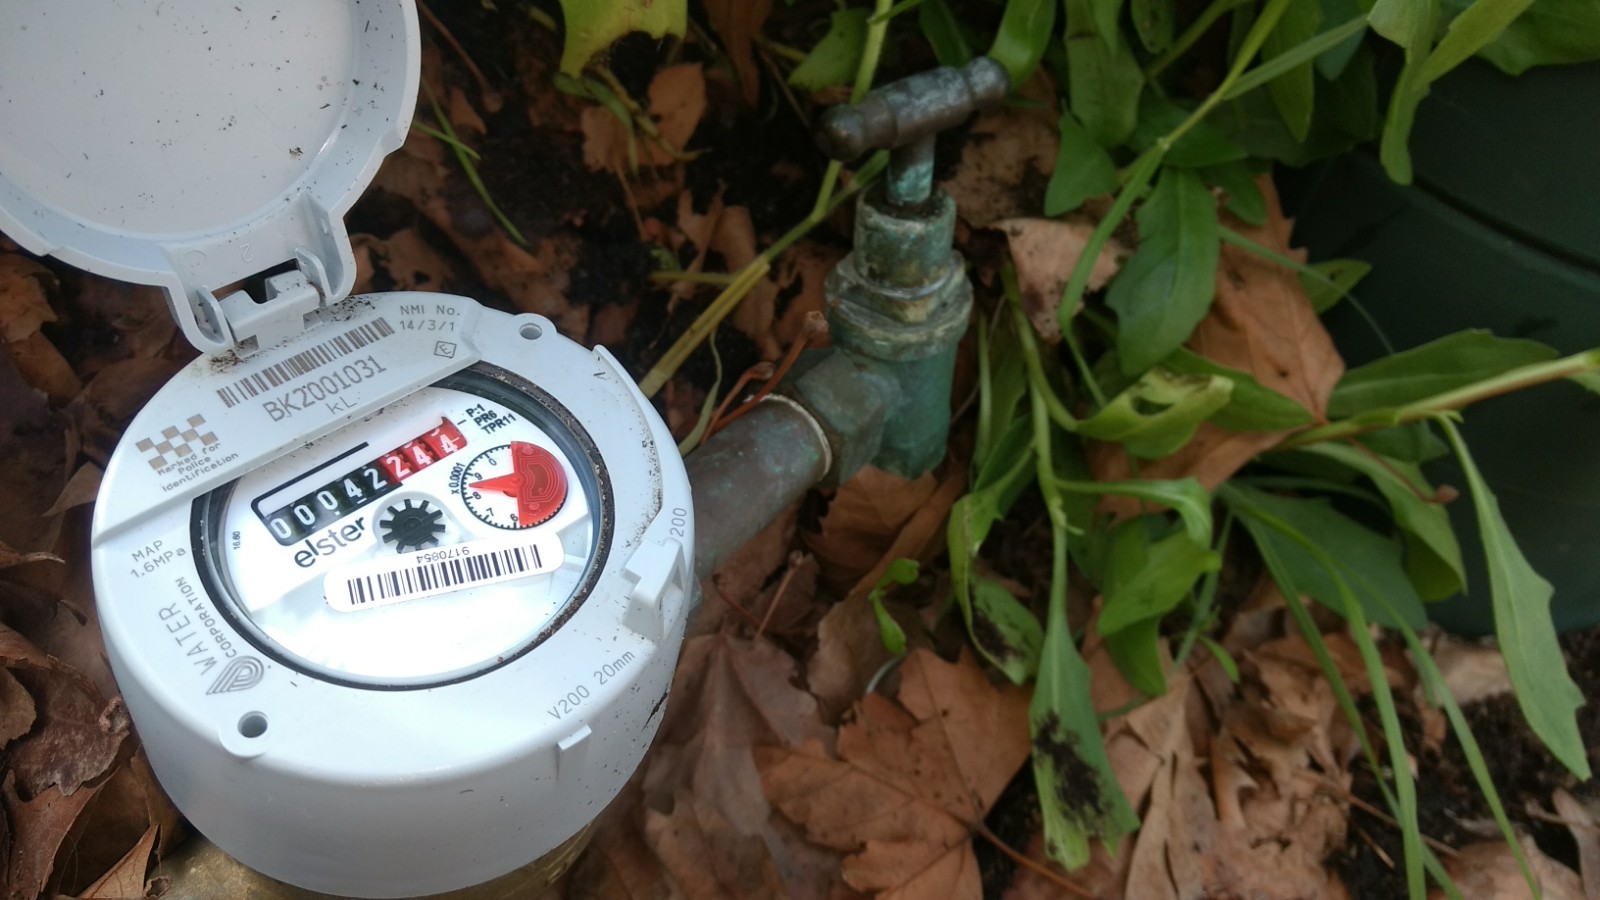 Water provider replaces faulty meter image